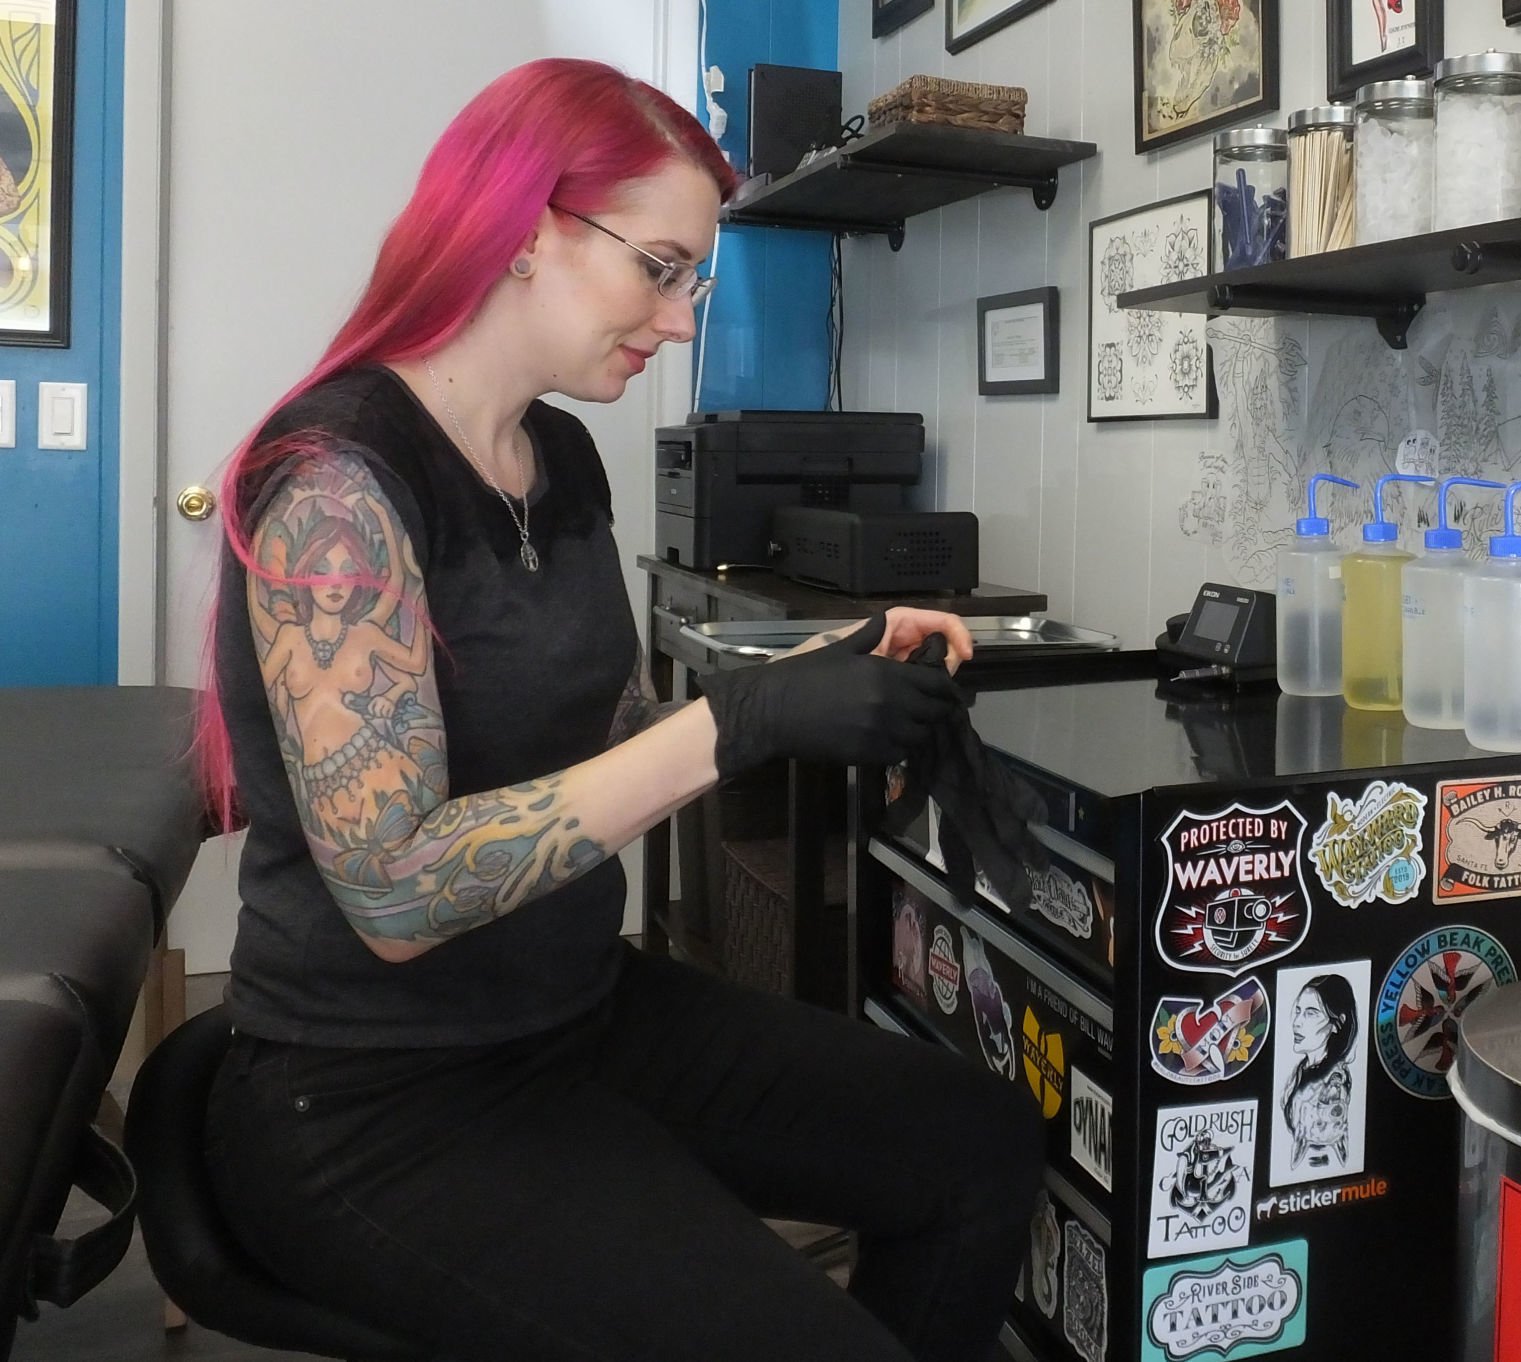 St. Pete tattoo parlor offers to cover up hate and racist symbols for free